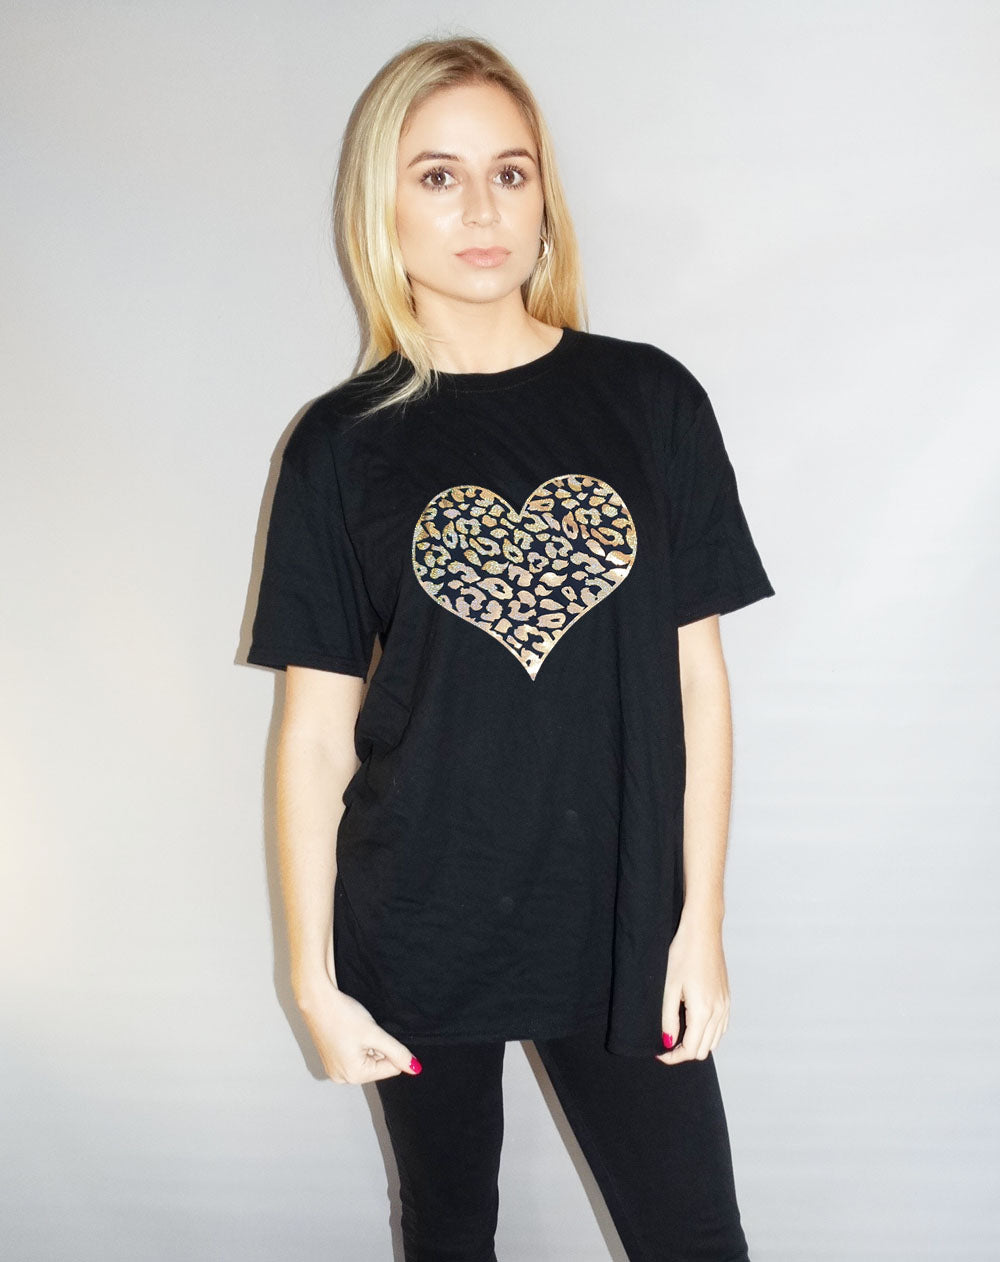 Black Tshirt with Leopard Heart in Gold Holographic